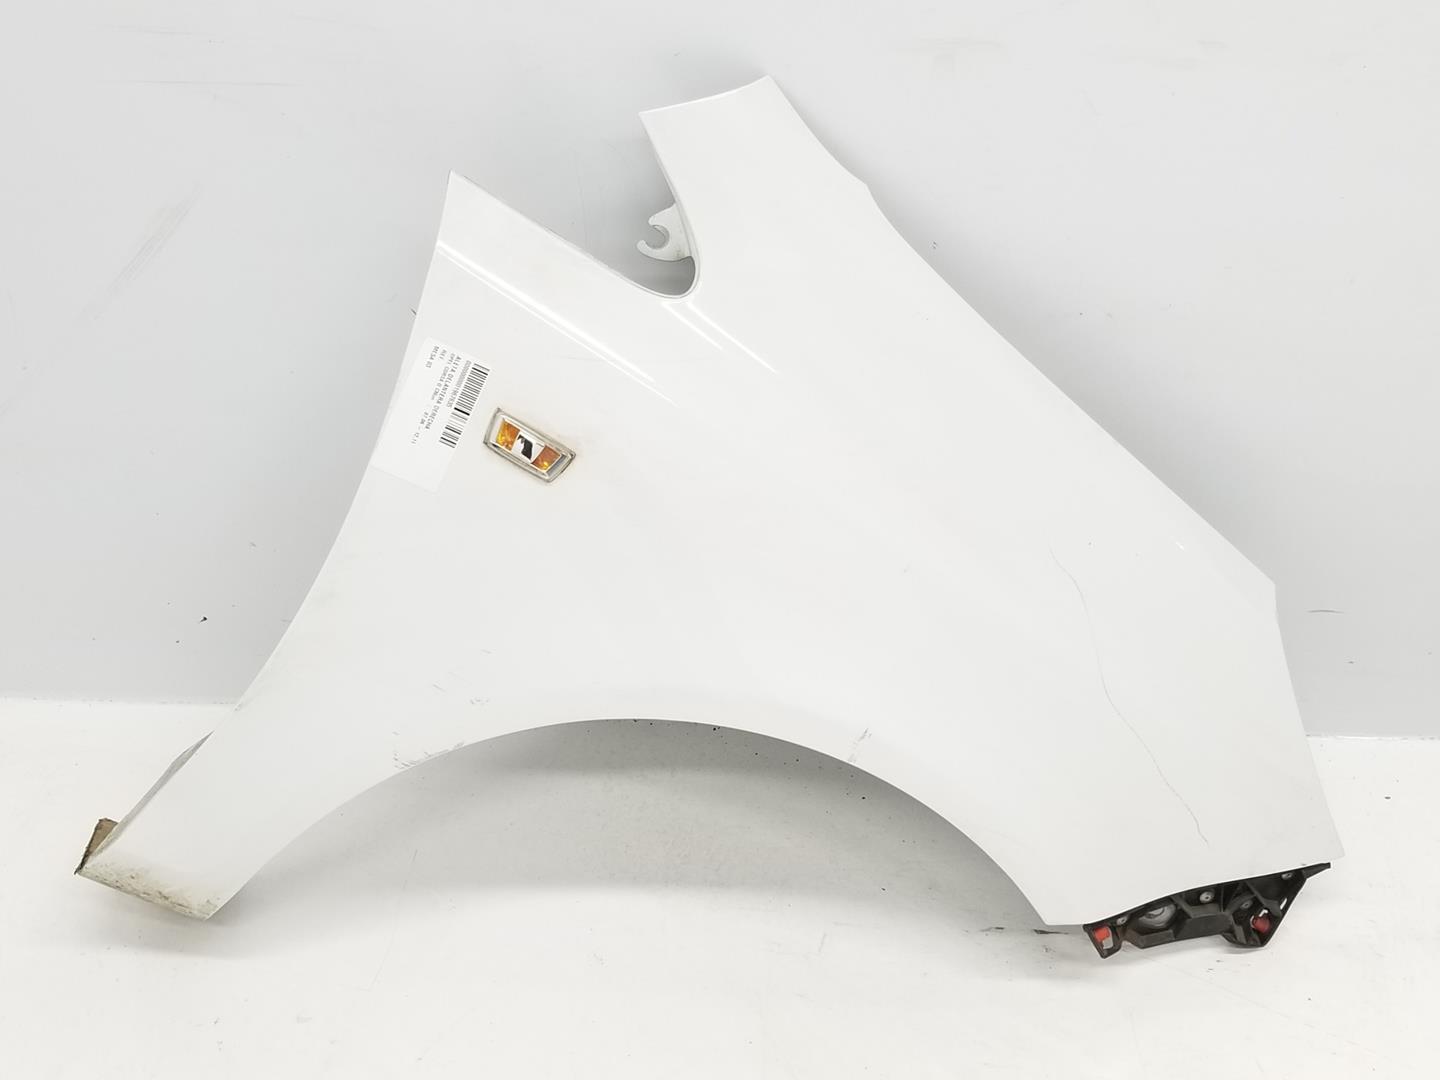 OPEL Corsa D (2006-2020) Front Right Fender 93189644, 93189644, COLORBLANCO 24170720